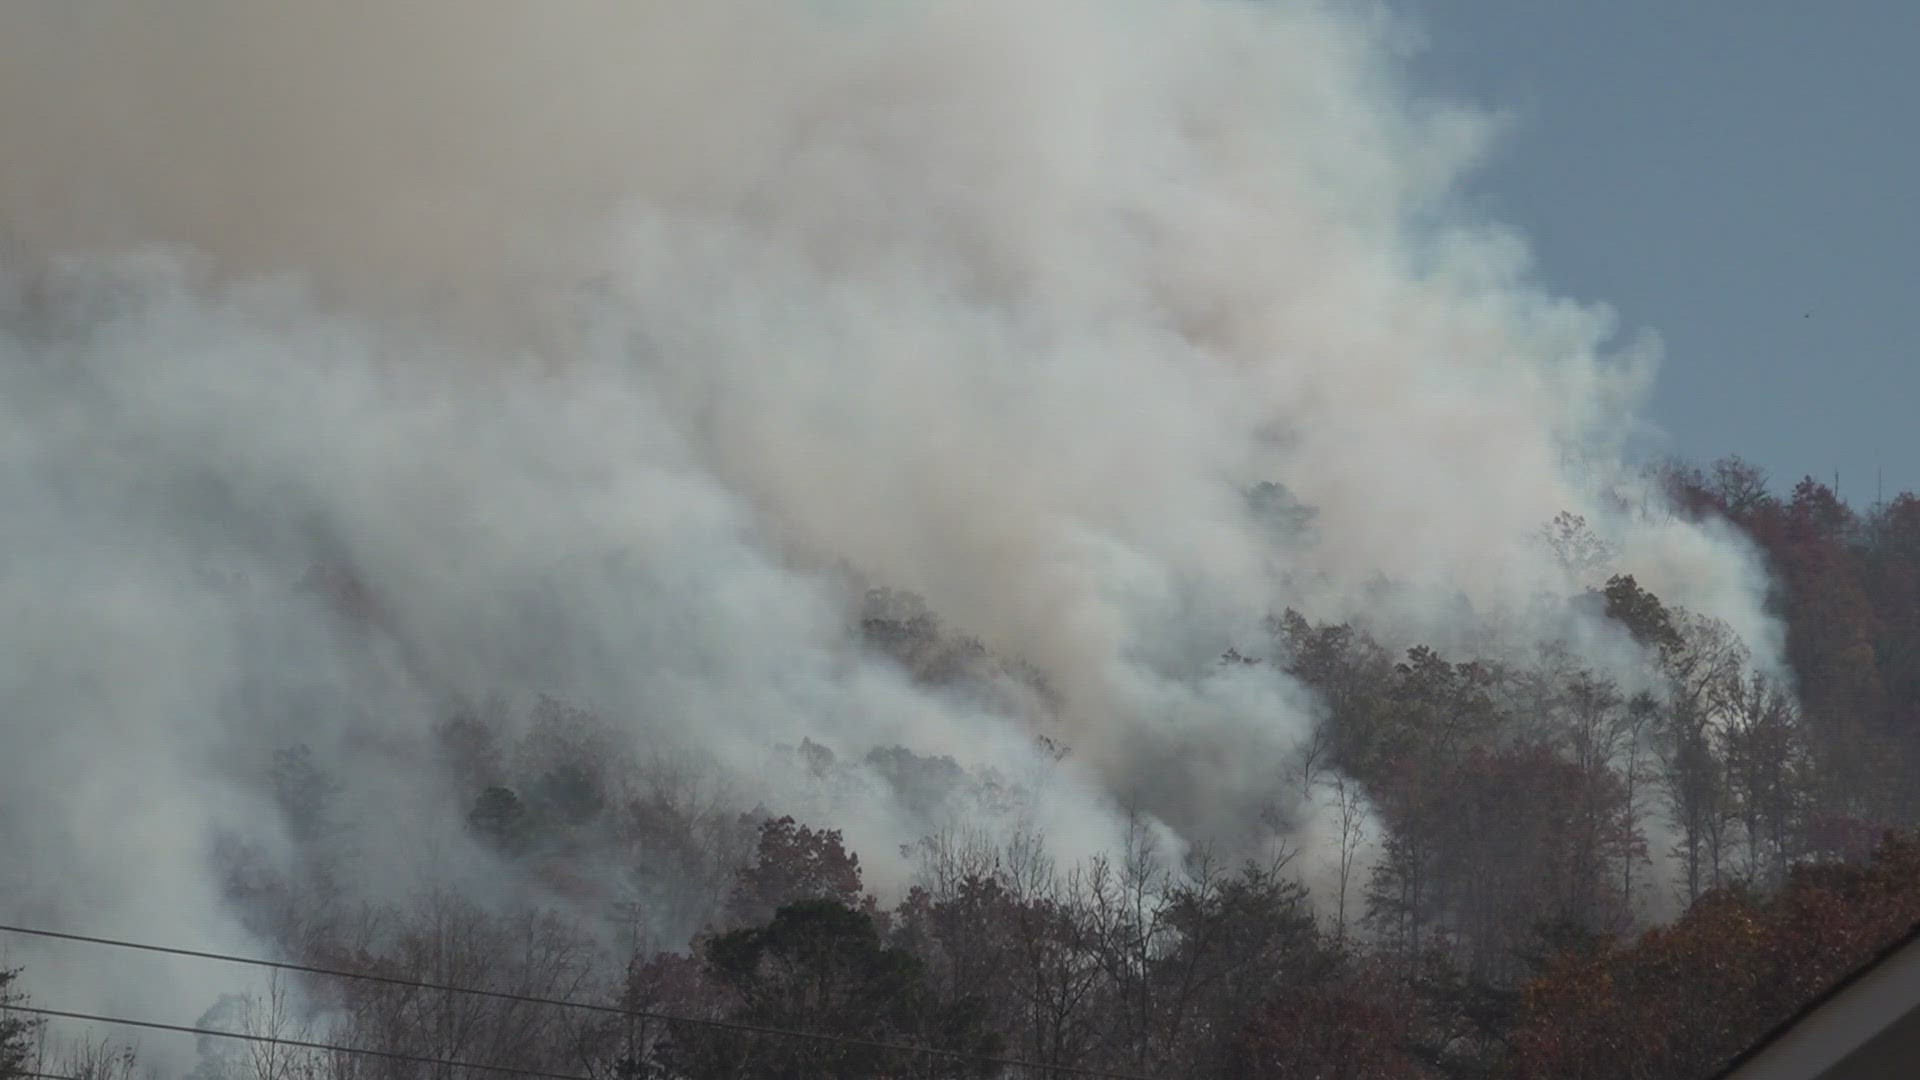 No injuries have been reported and no structures are in danger, according to Anderson County officials.